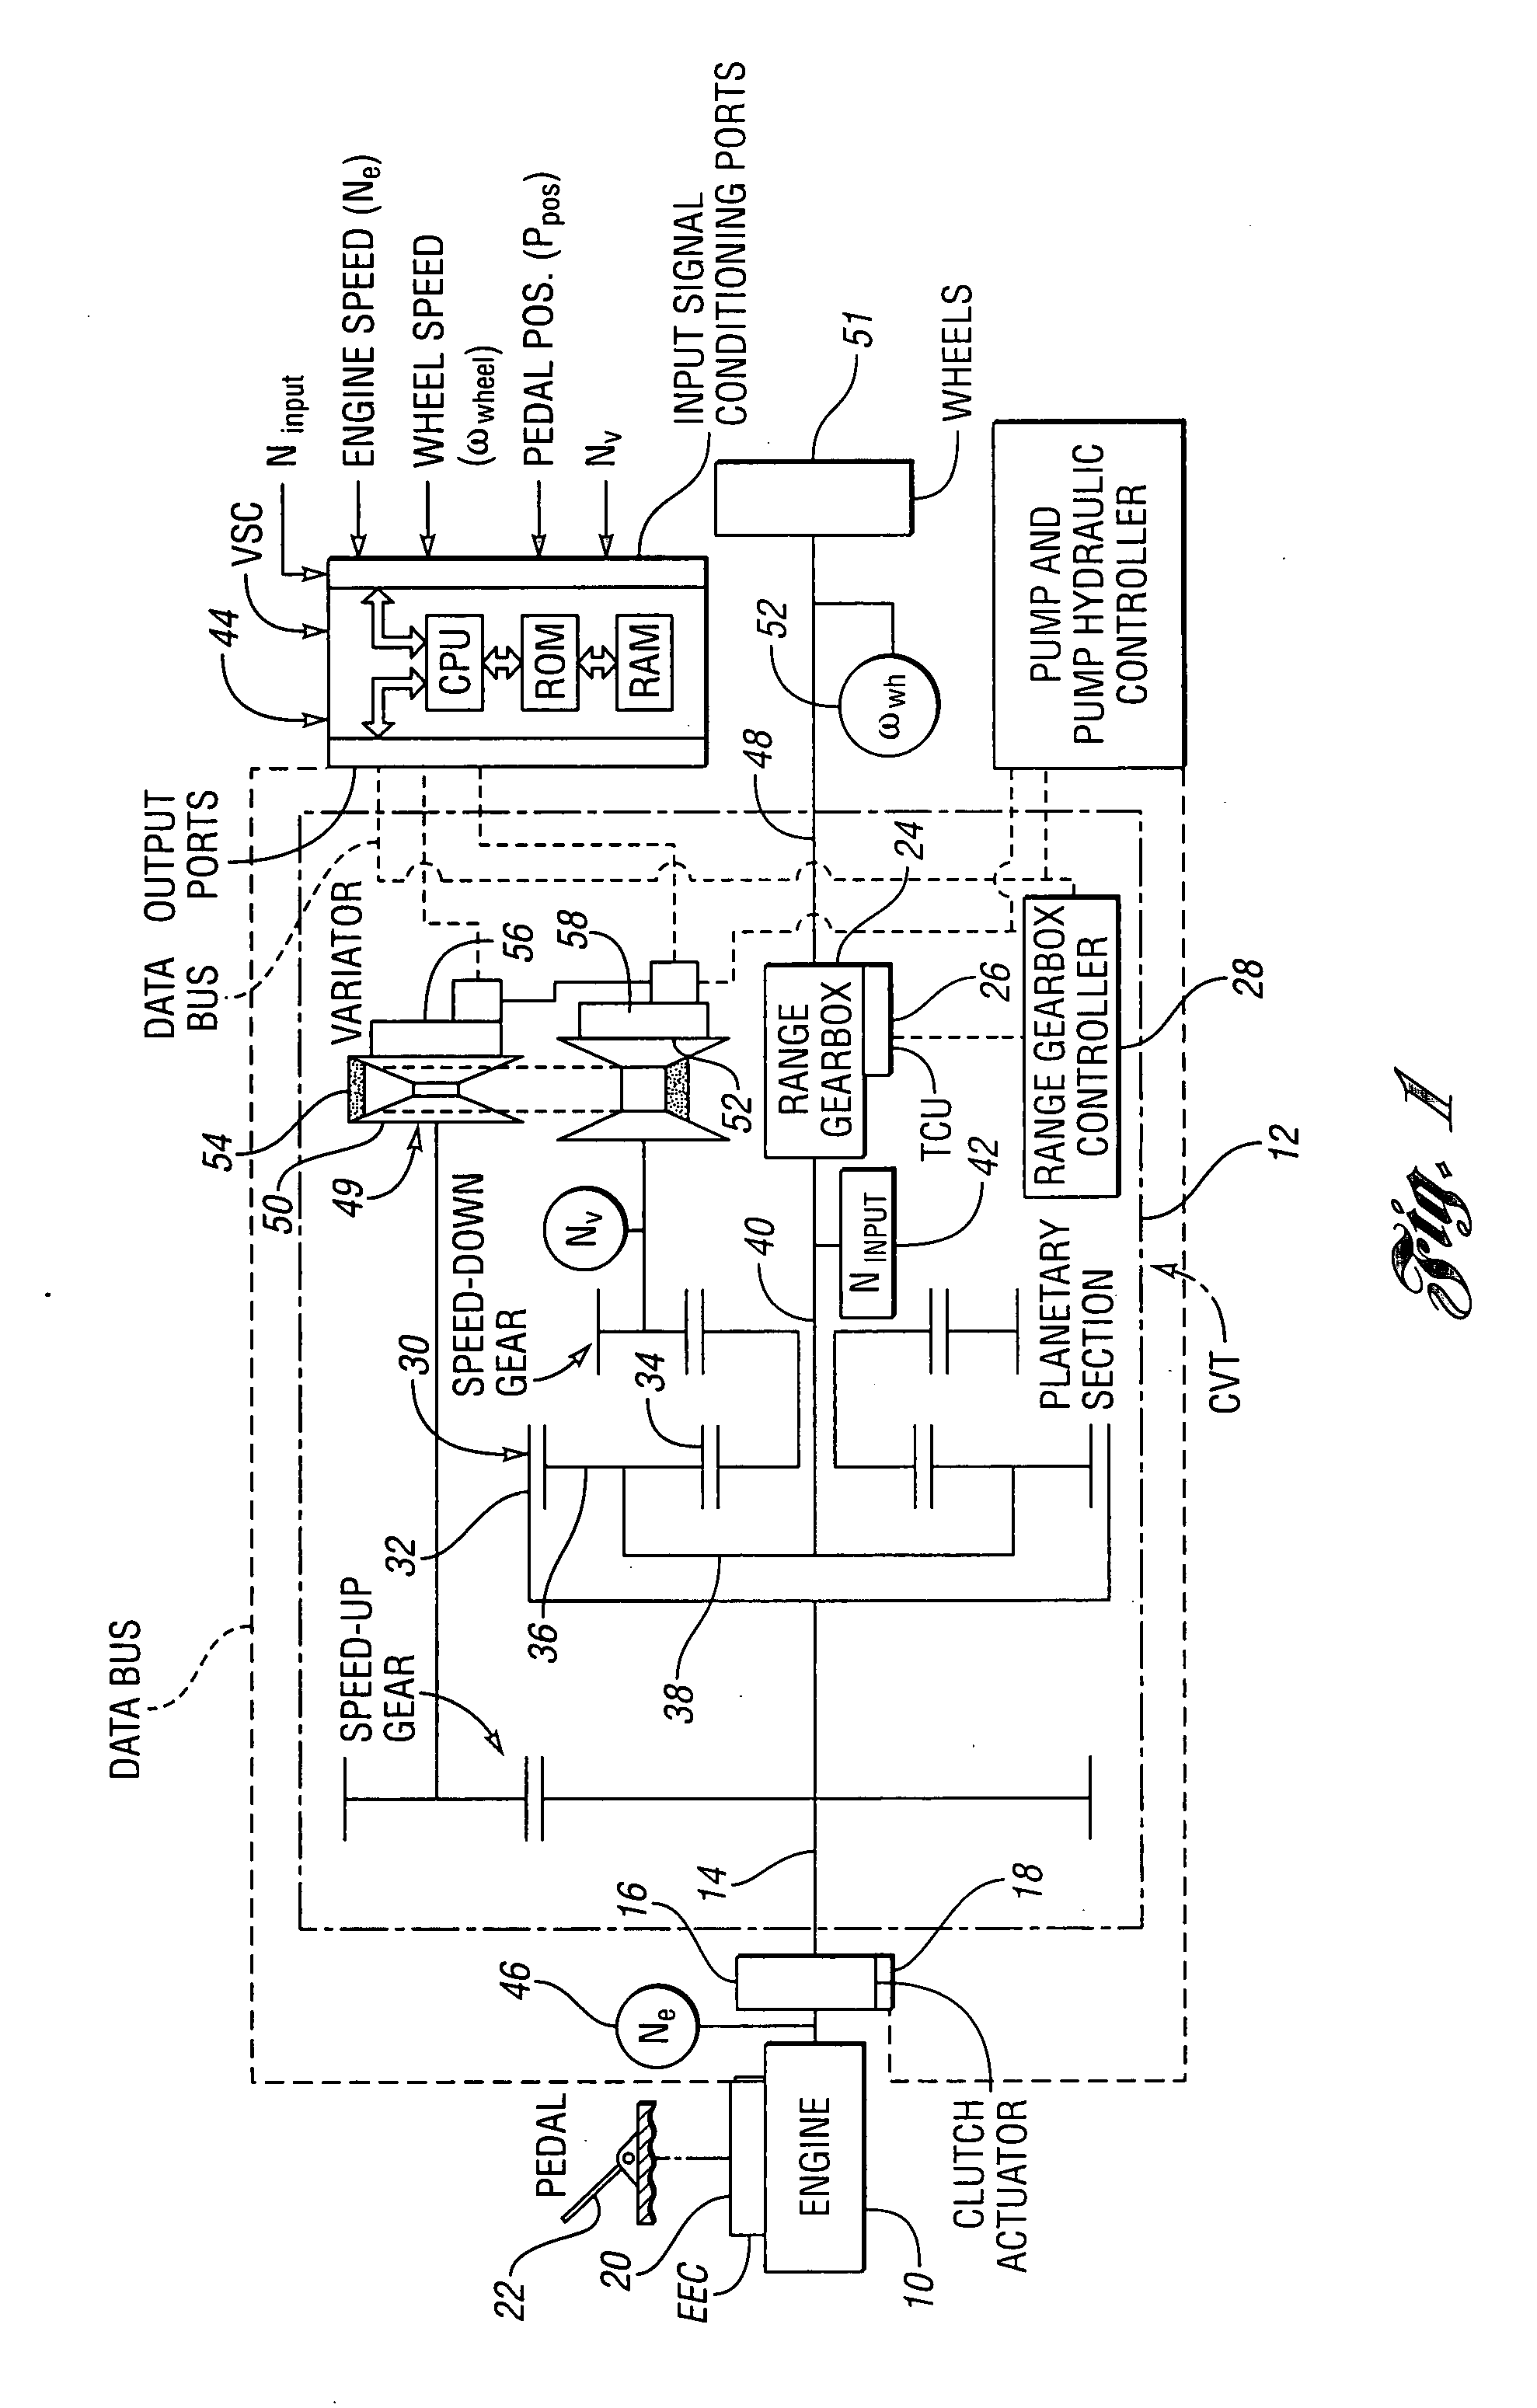 Method for controlling a vehicle powertrain having step ratio gearing and a continuously variable transmission to achieve optimum engine fuel economy